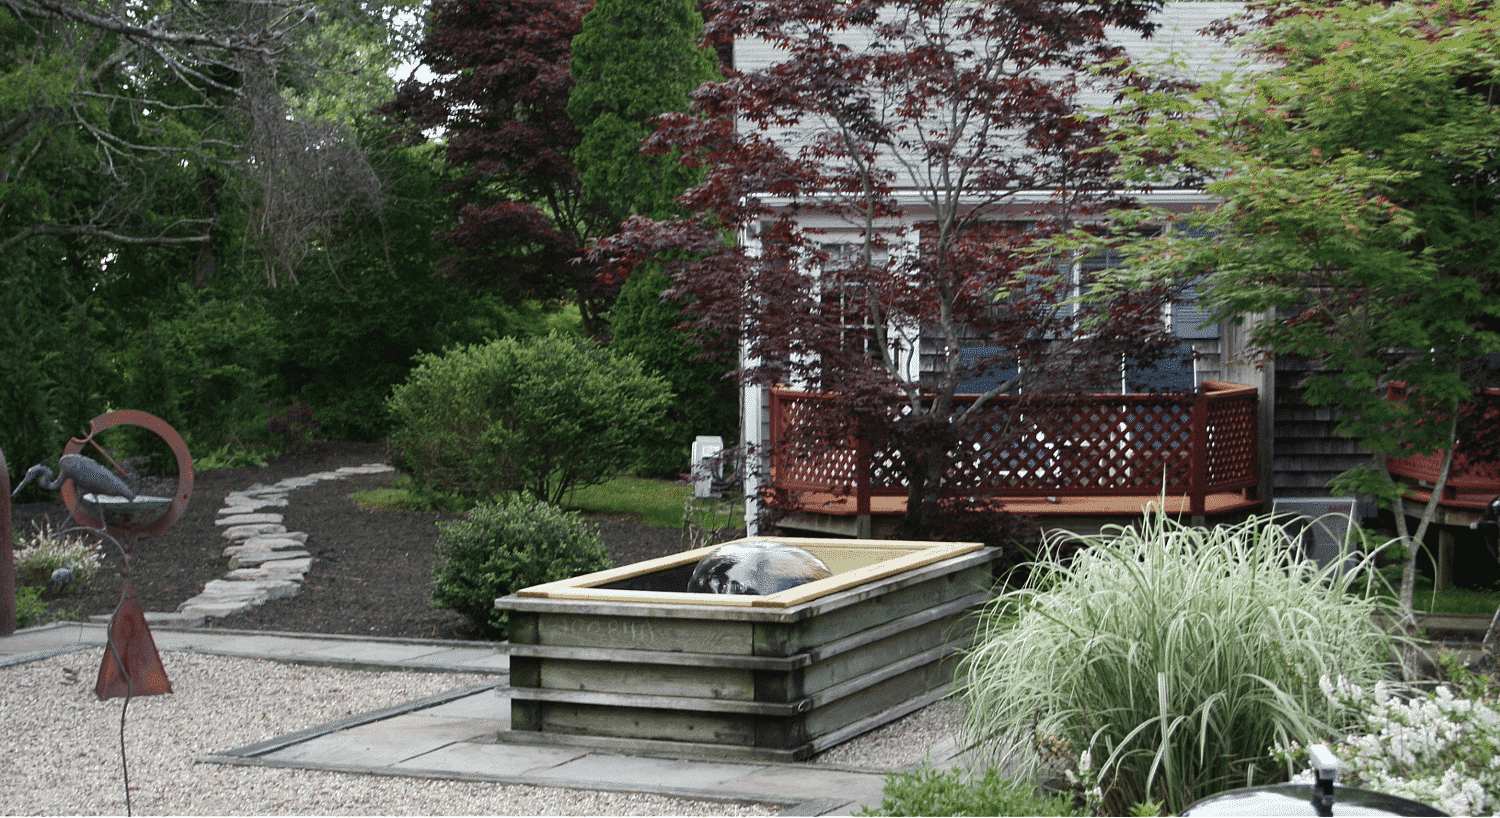 Back deck area of a cottage with water fountain feature, metal sculpture and rock patio